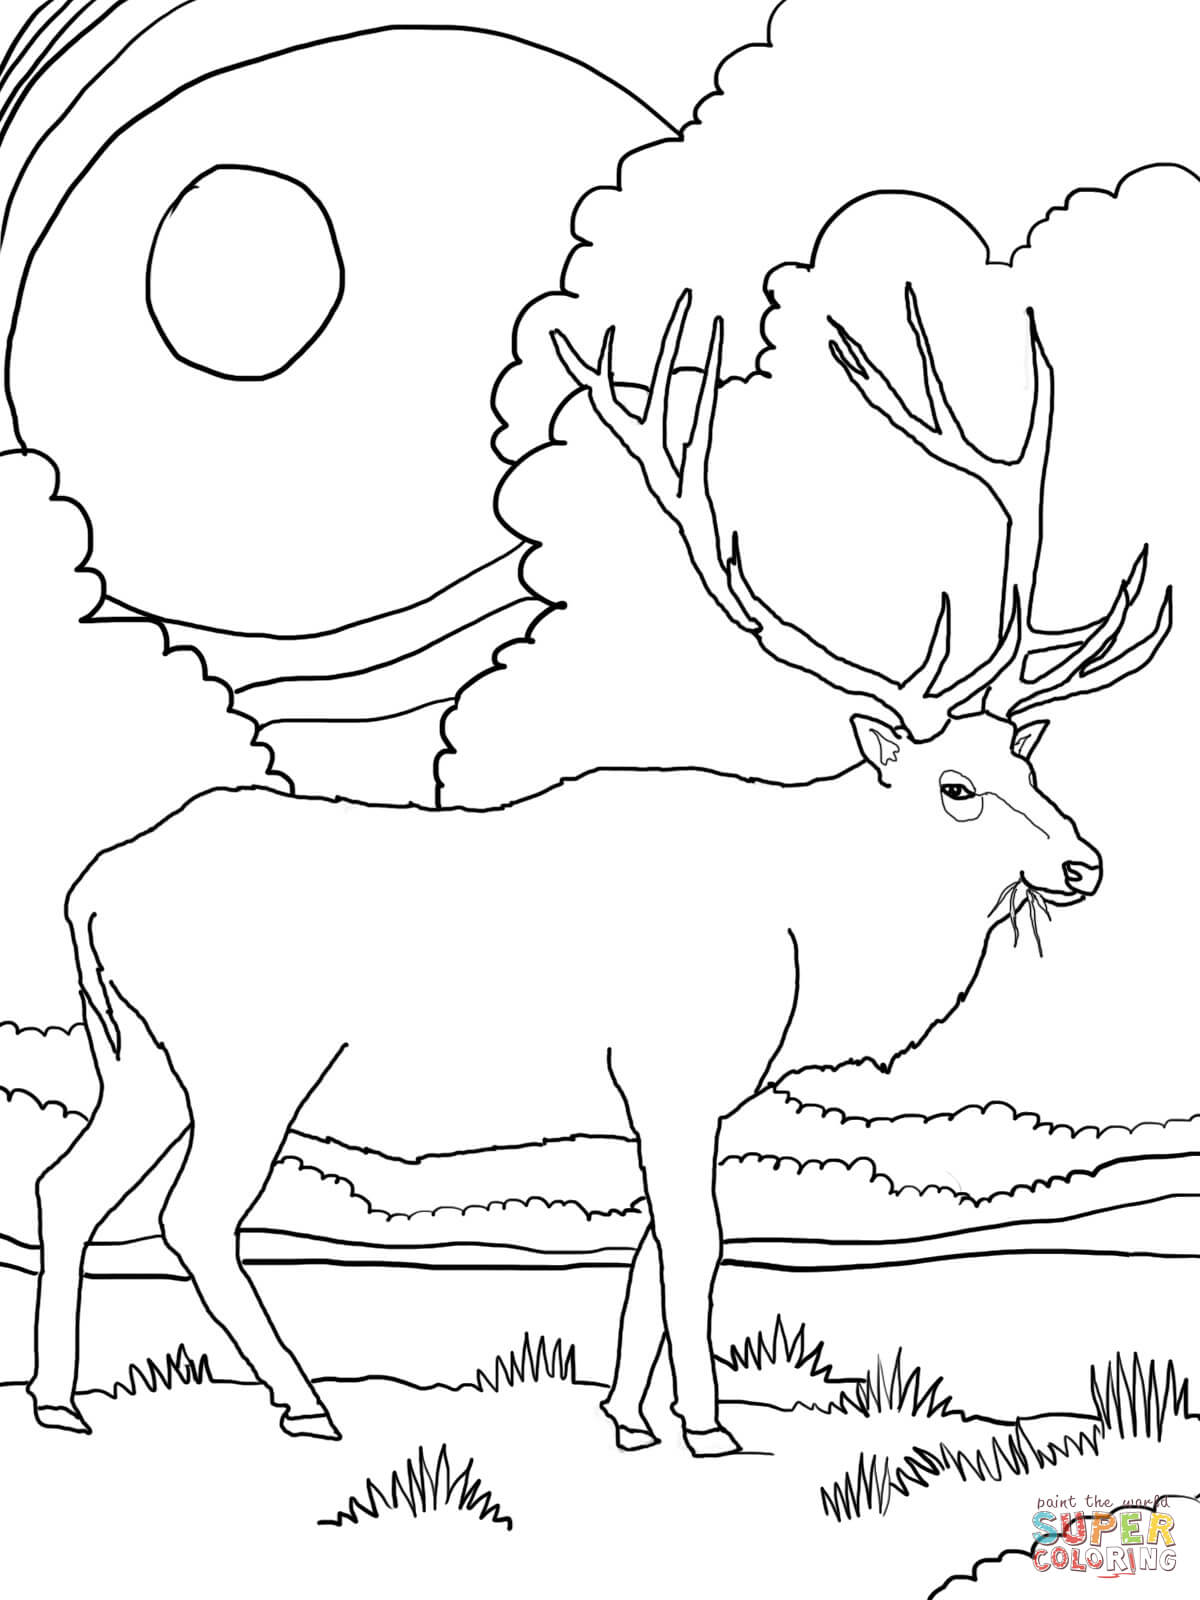 Rocky Mountain Elk coloring page | Free Printable Coloring Pages